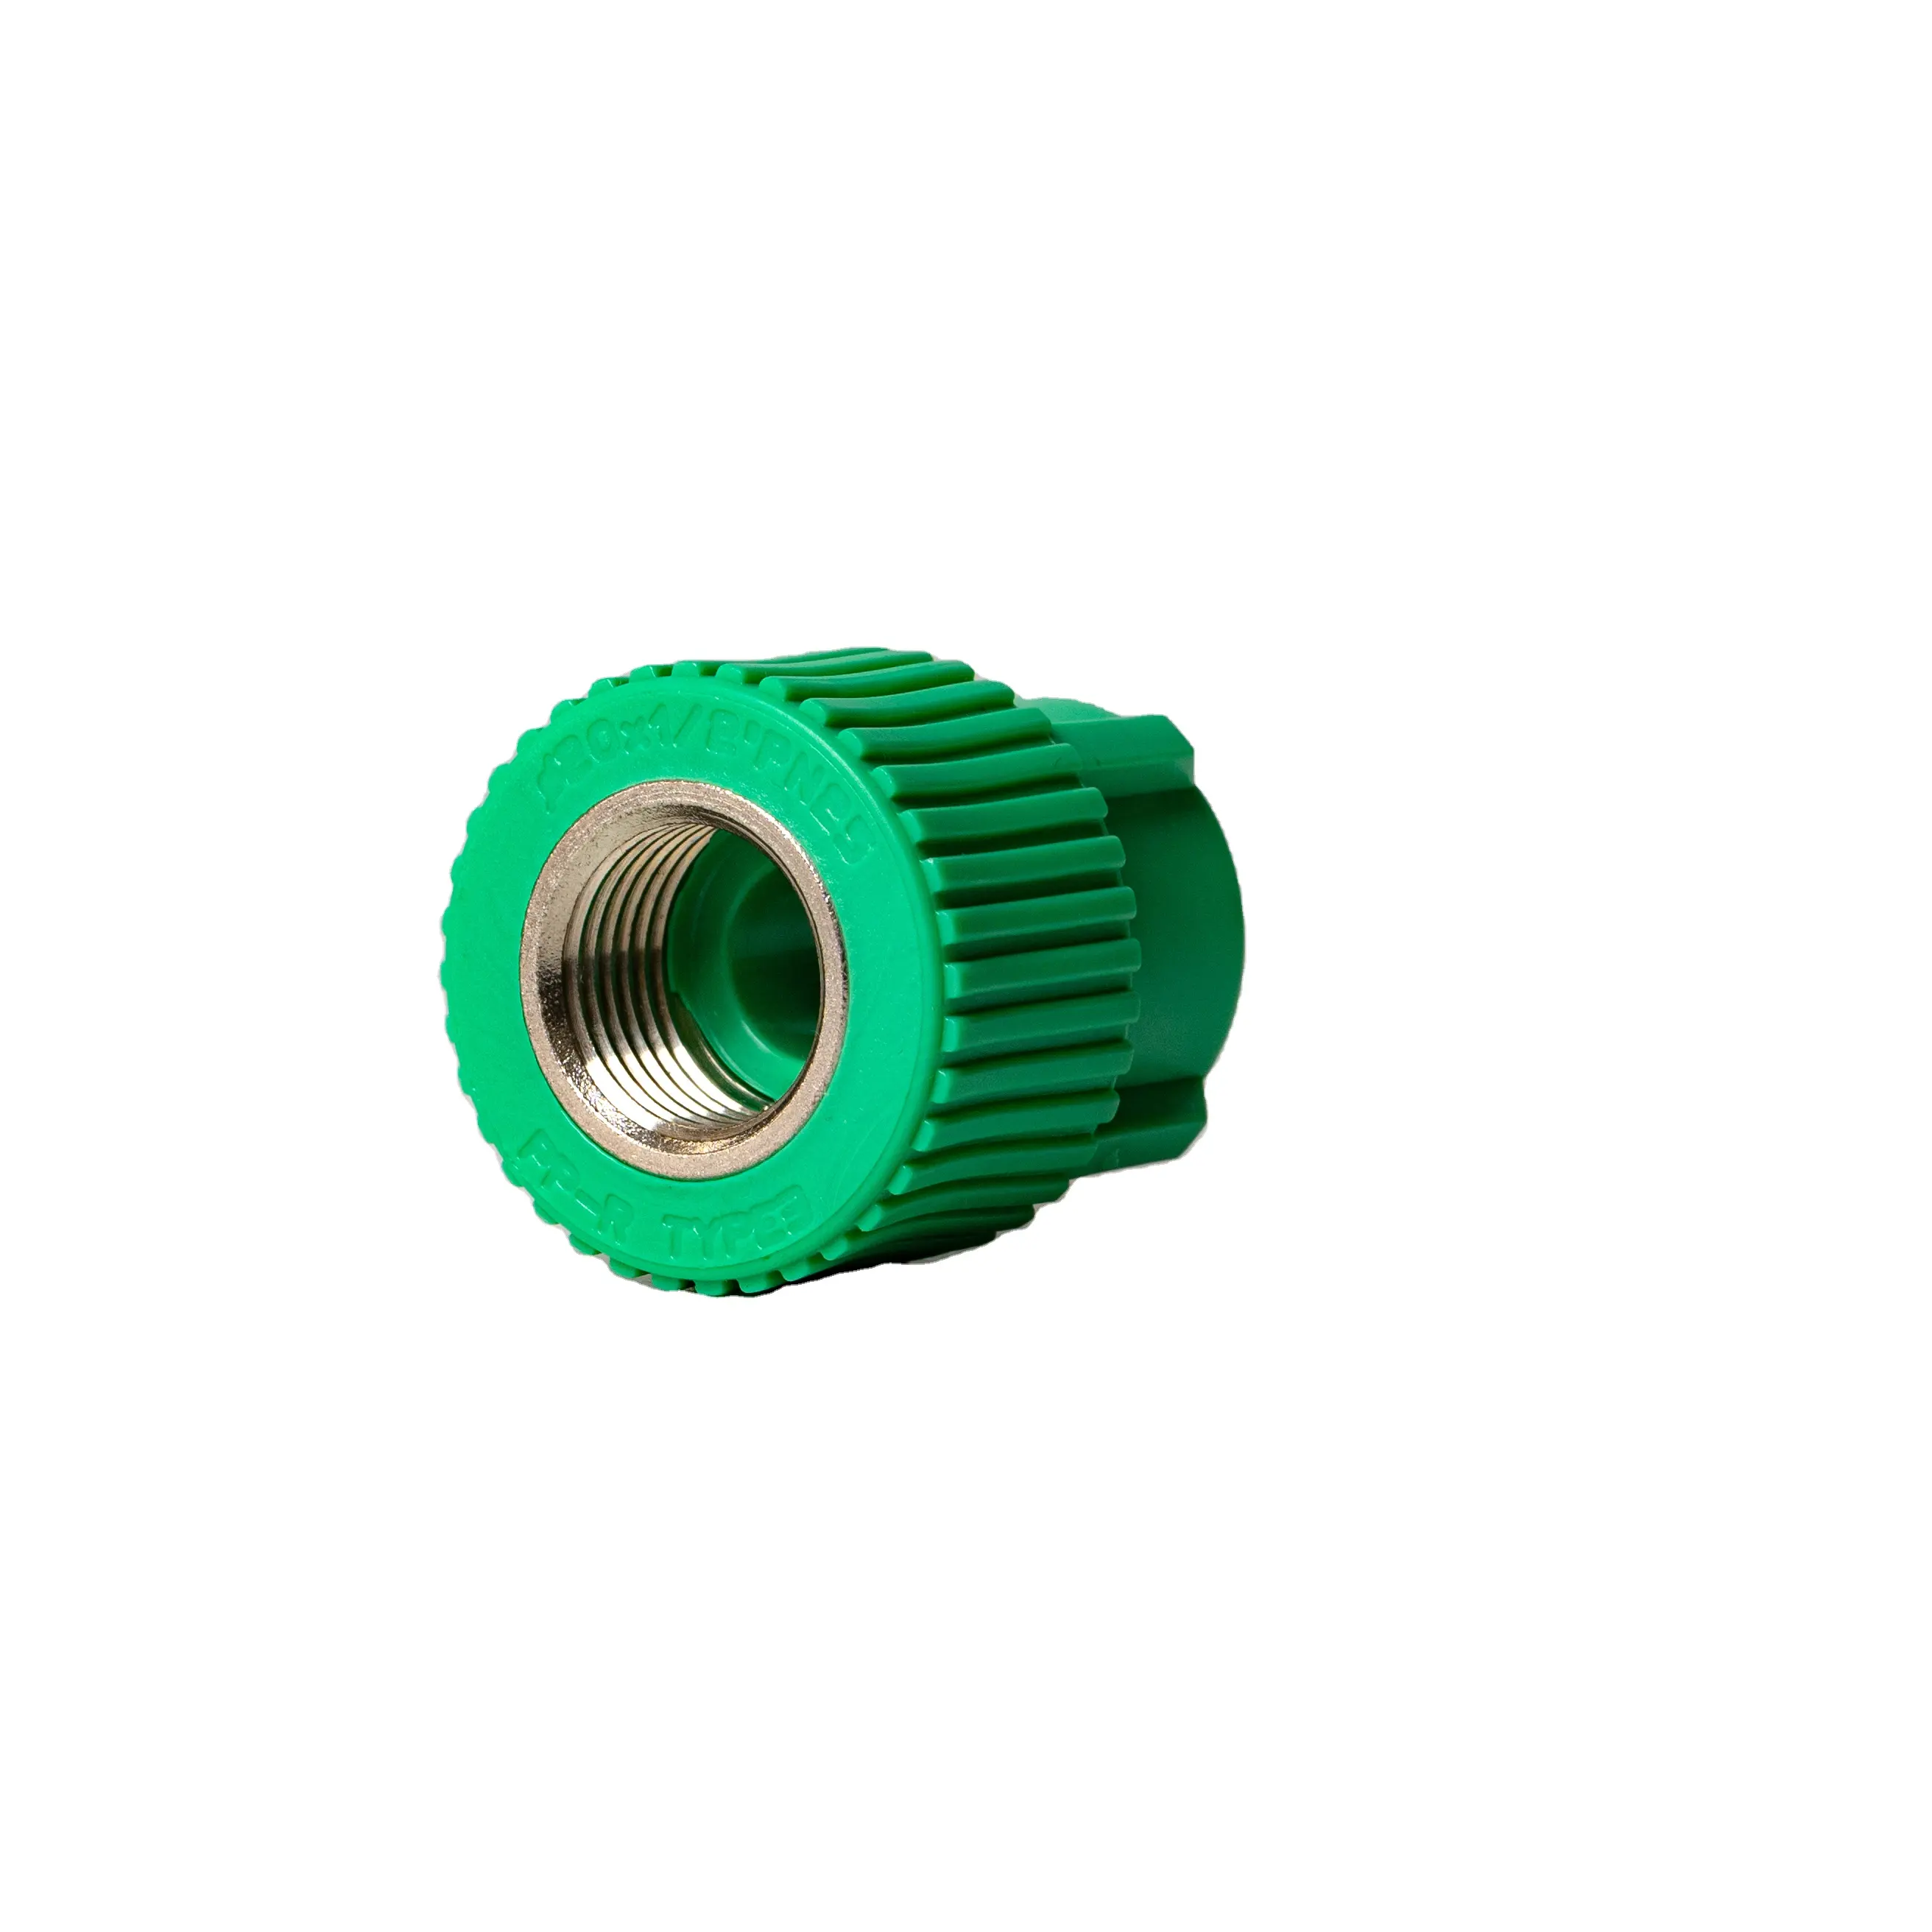 Made in Italy manifacturing Solder fittings PP-R Type 3 Manifold Without Stopcocks PN 25 hydrotermosanitary application plyfusio